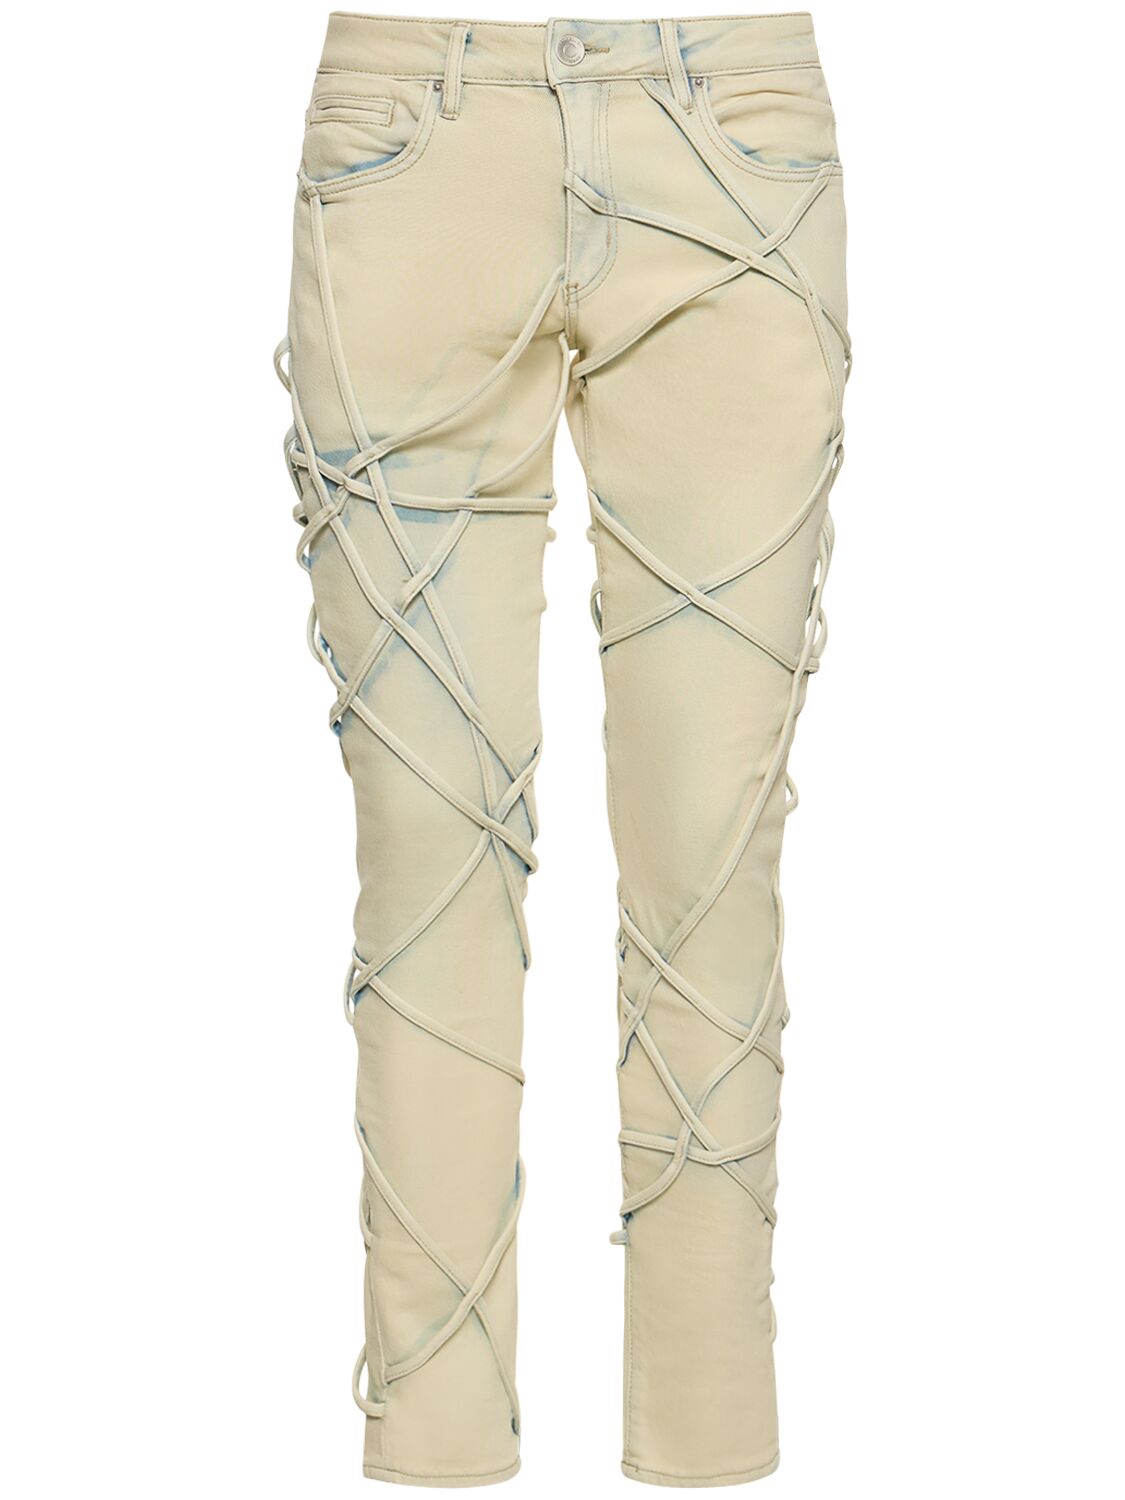 EMBELLISH Ozzy Faded Skinny Jeans